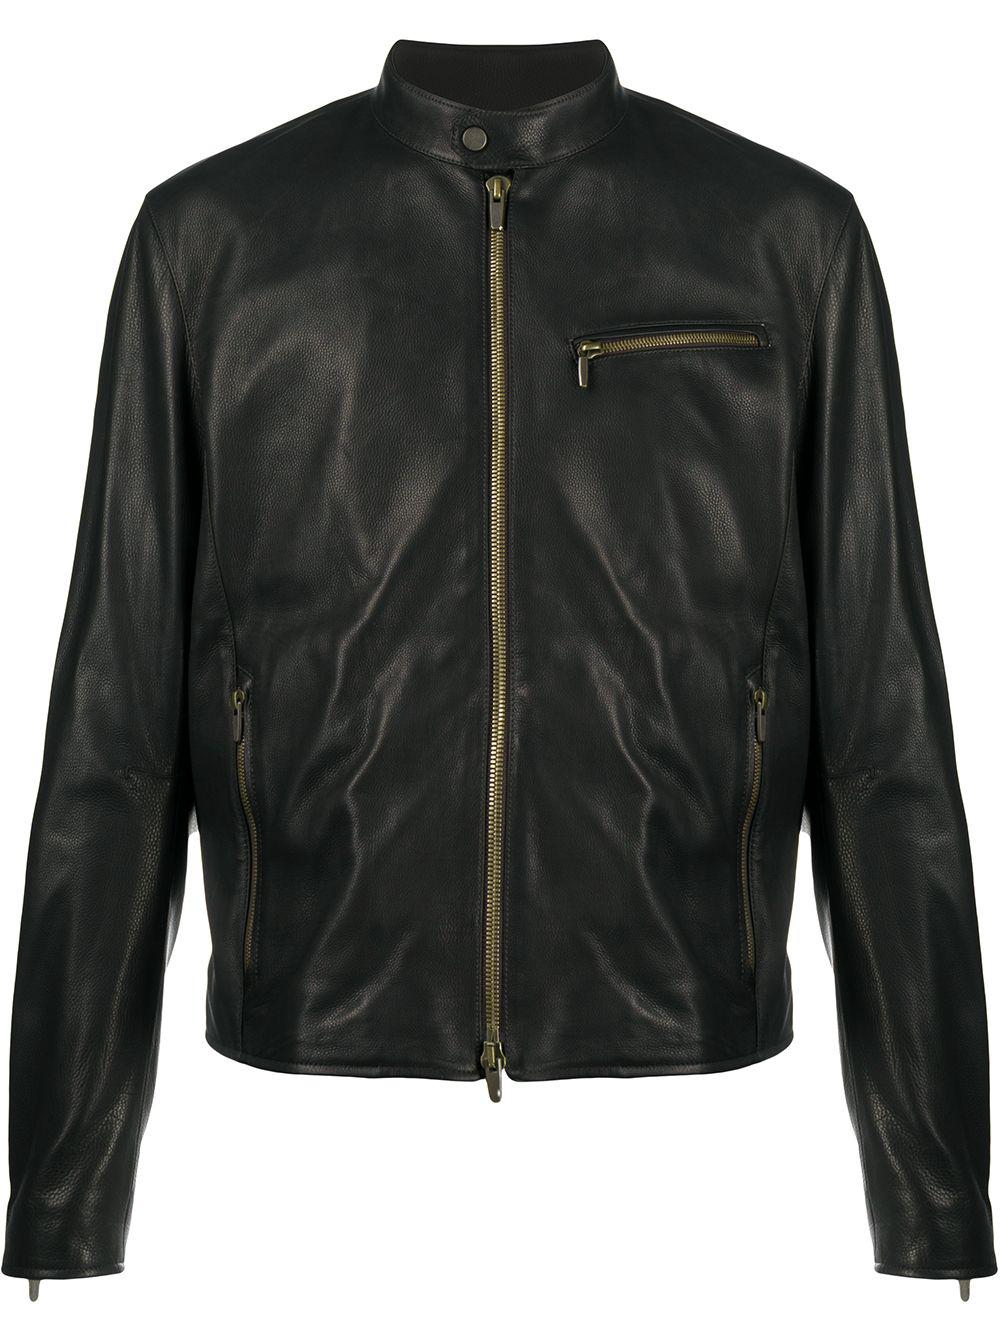 structured leather jacket by AJMONE